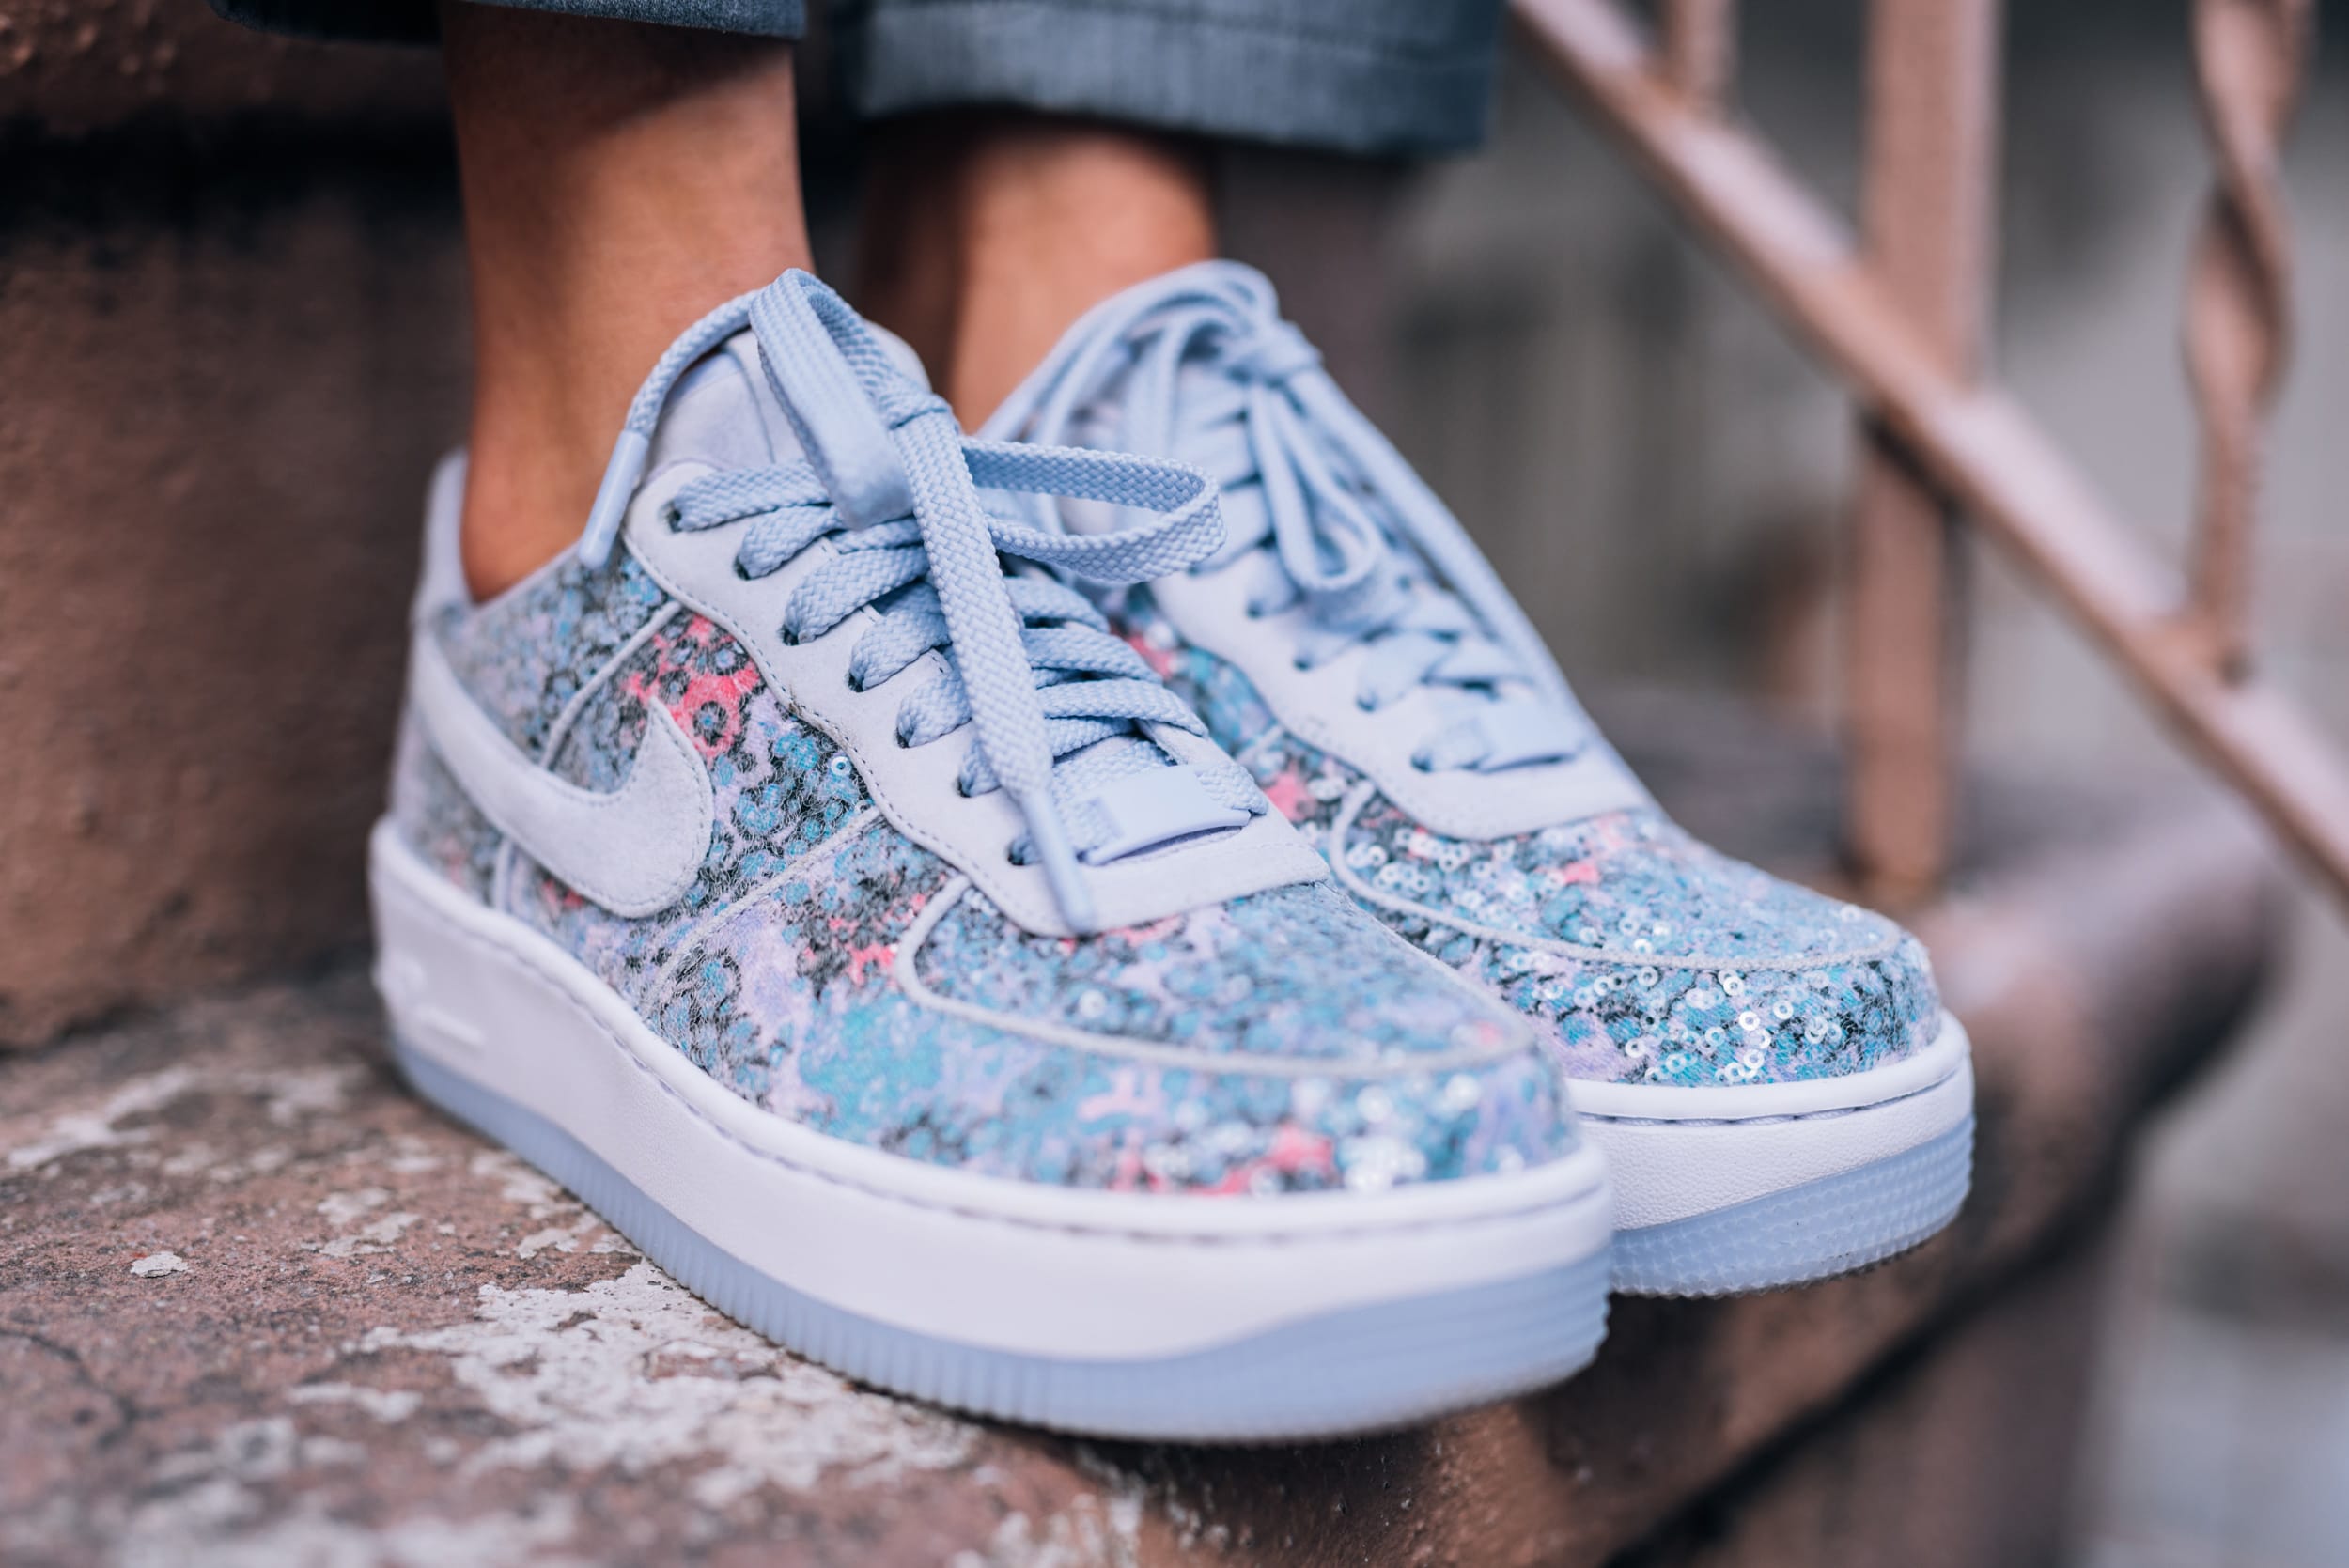 The Nike Air Force 1 Upstep Low Glass Slipper is Fit for a 